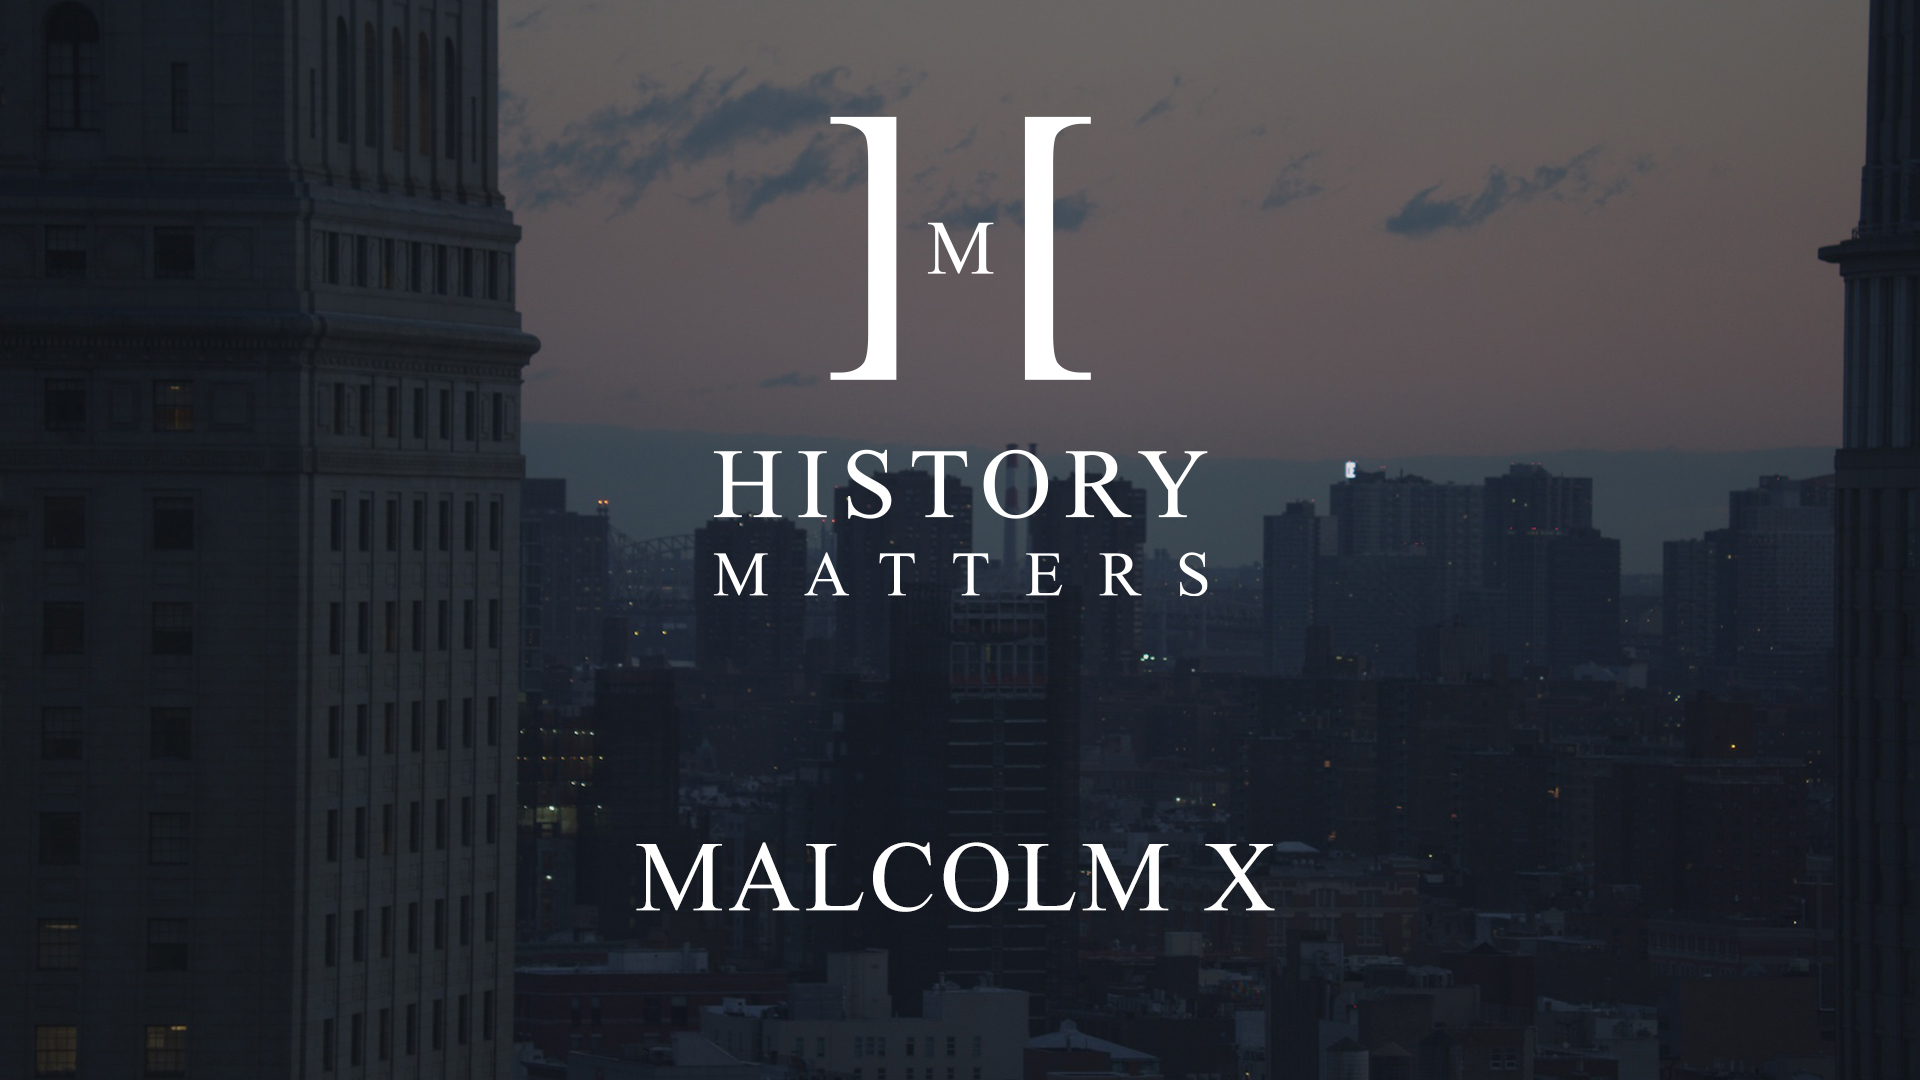 IU C&I Studios Page White HM Malcolm X logo with dimmed background showing an aerial view of a city at dusk